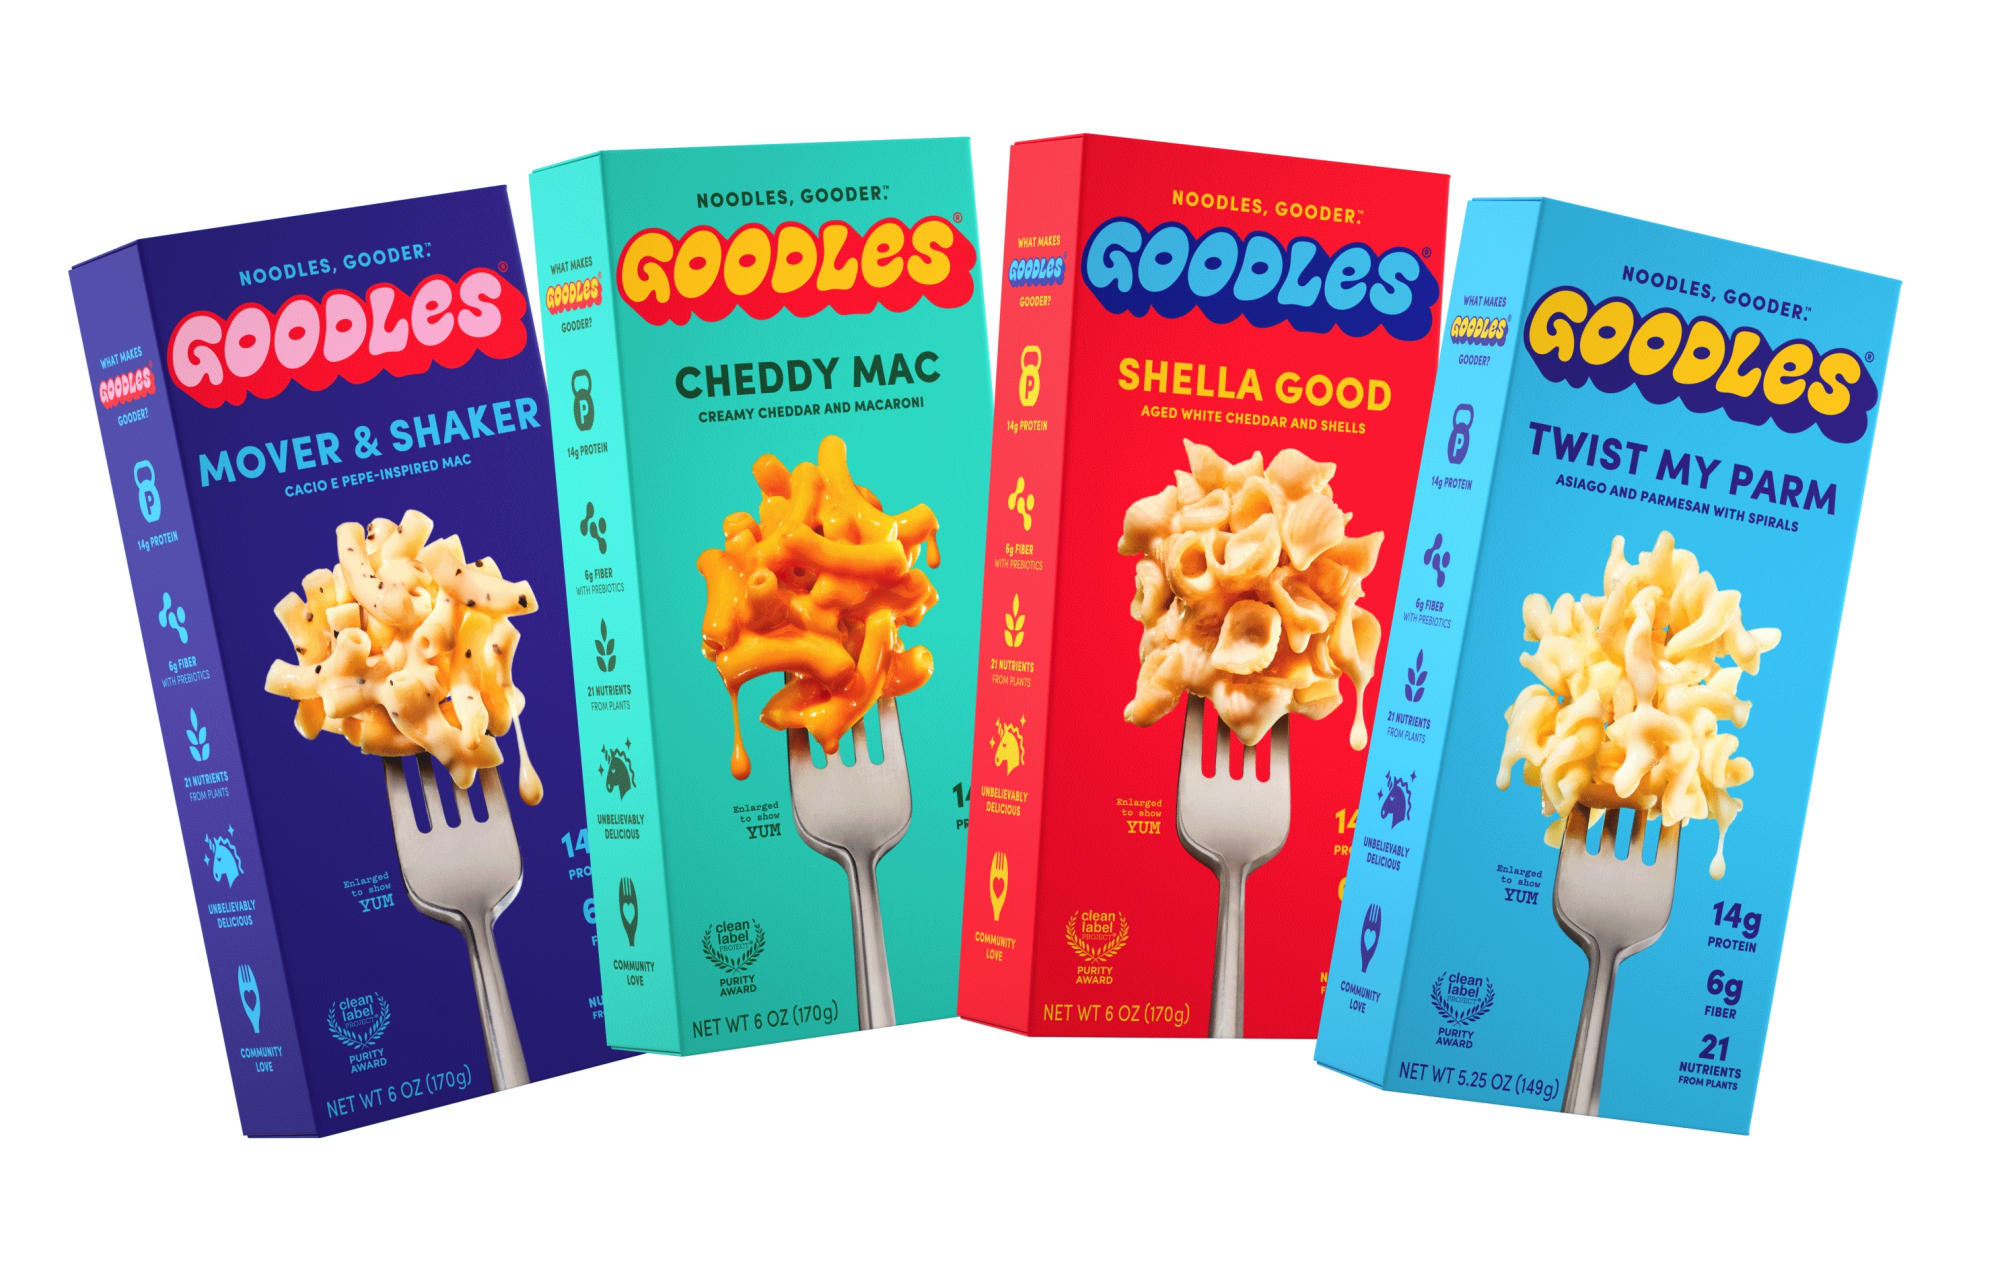 Goodles mac and cheese is ‘shella good’